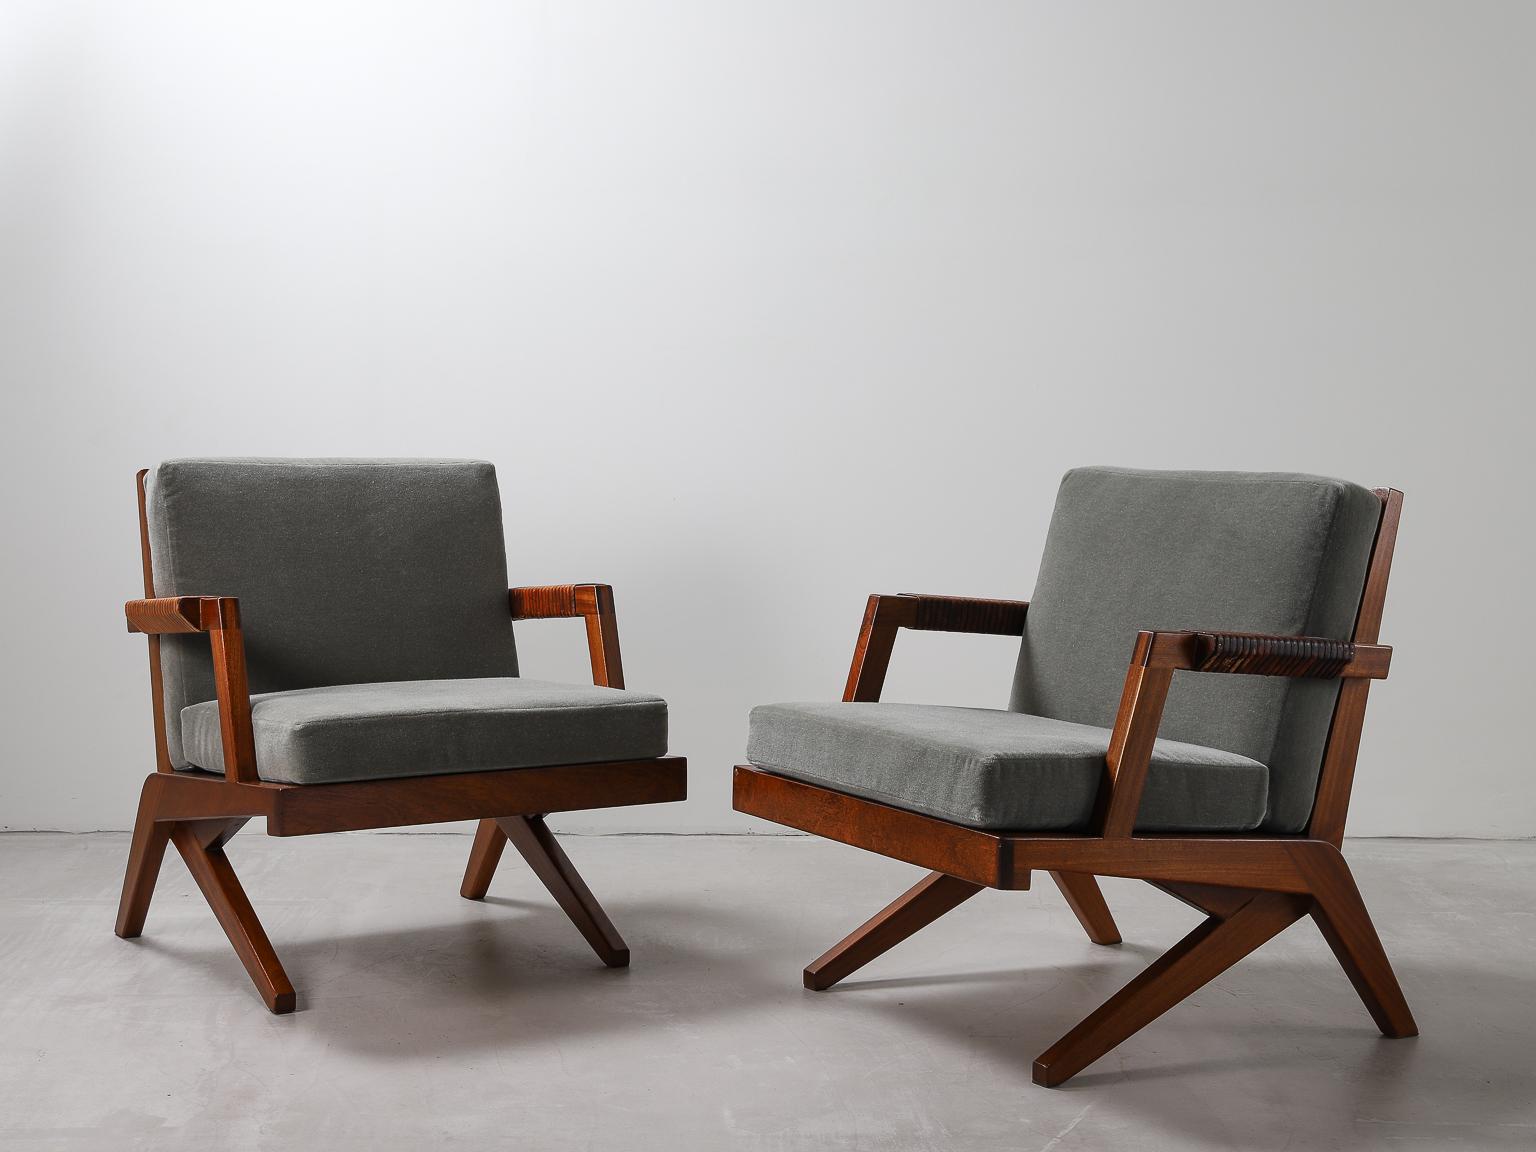 Olavi Hänninen 3 piece sofa suit 1960s. Mahogany frames and armrests with leather windings with original cushions and newly upholstered in Bespoke Mohair Velvet. Designed for HMN Huonekalu Mikko Nupponen.

Armchairs can be sold separately to the